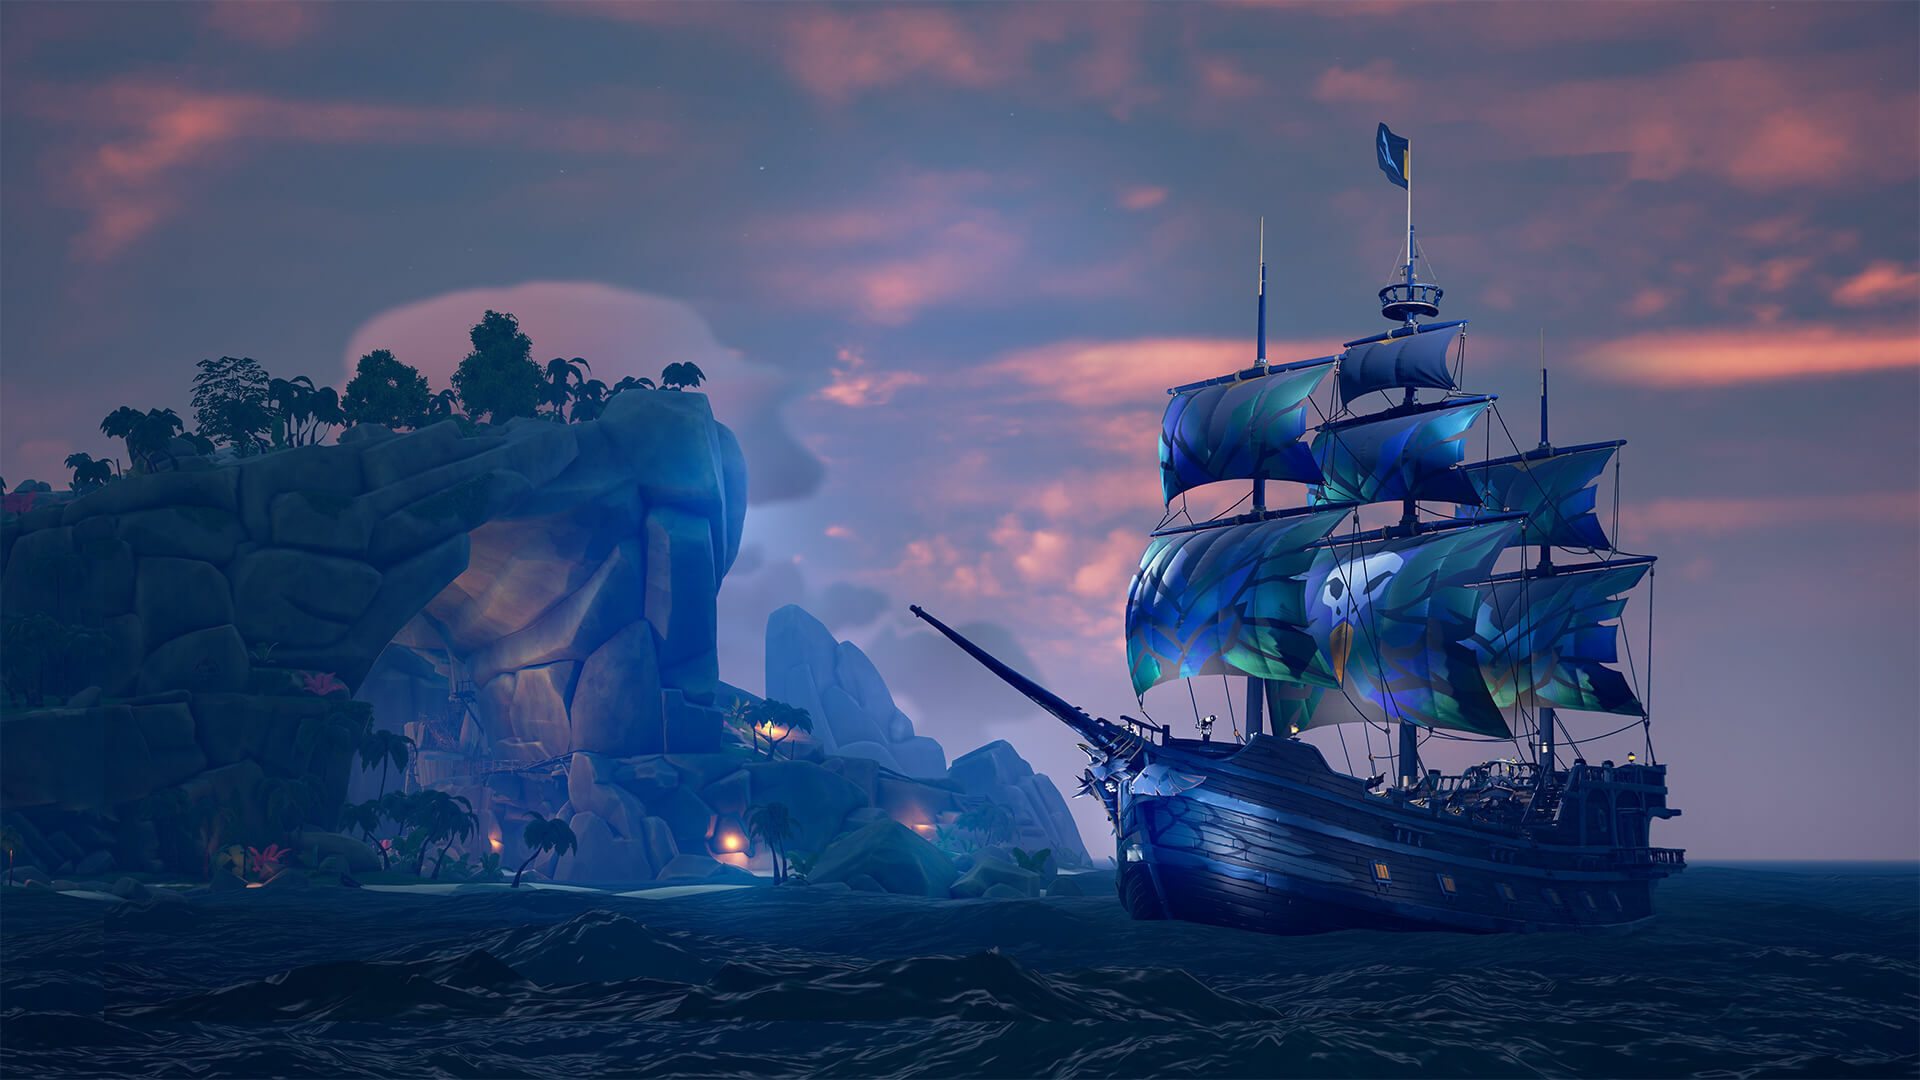 Skull and Bones Trailer Reveals Ship Customisation, Weapon Upgrades, and  Fort Plundering